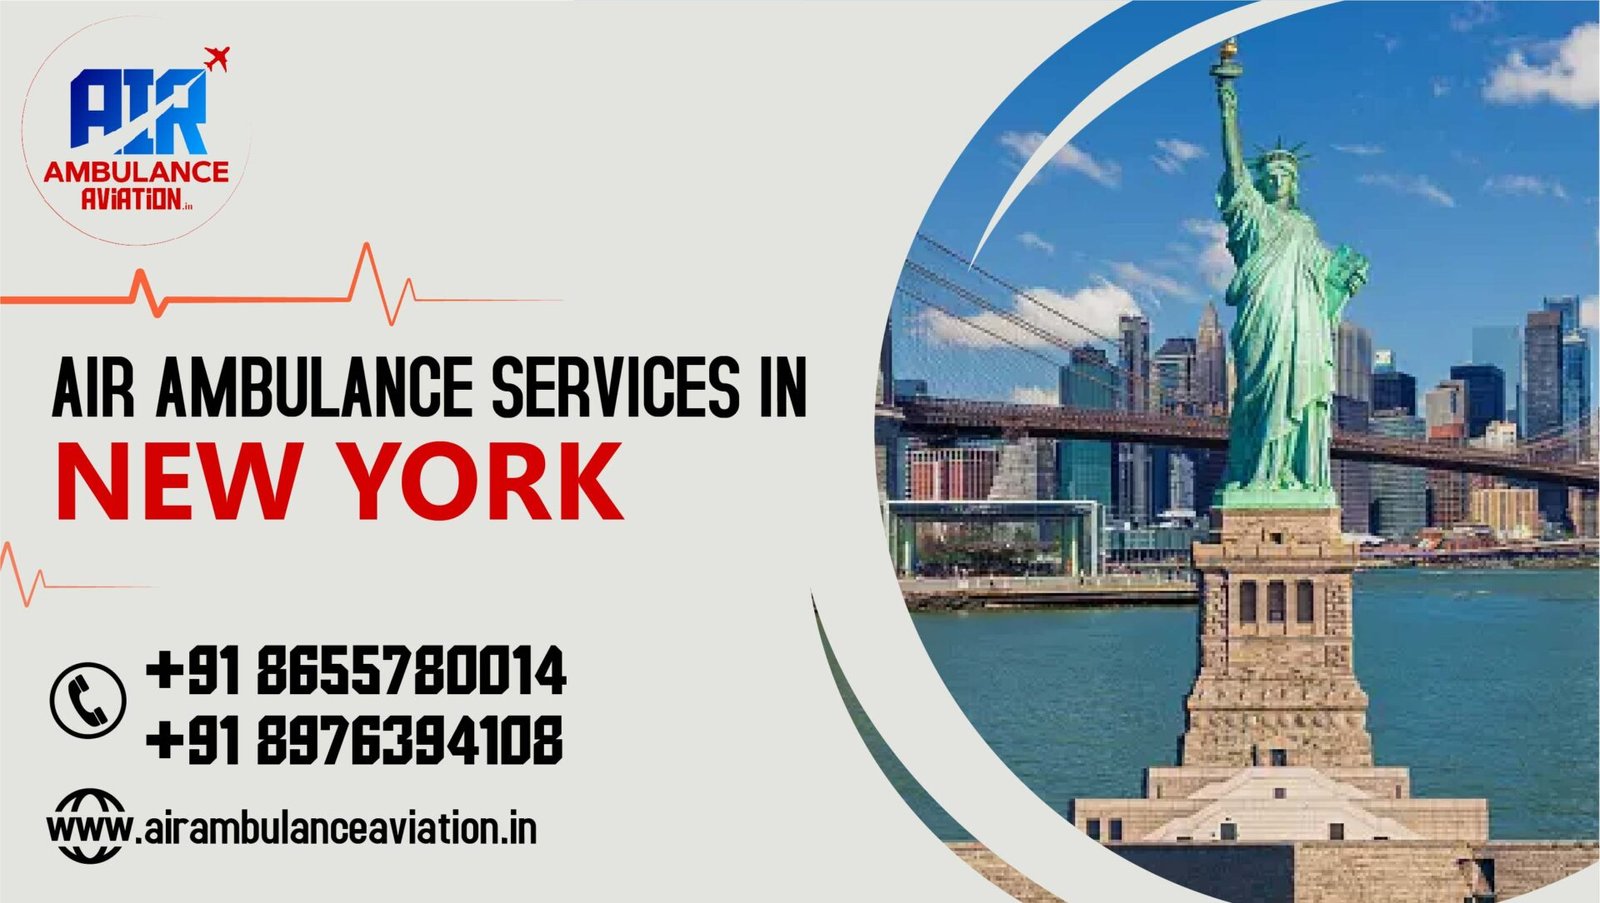 Air Ambulance Services in New York